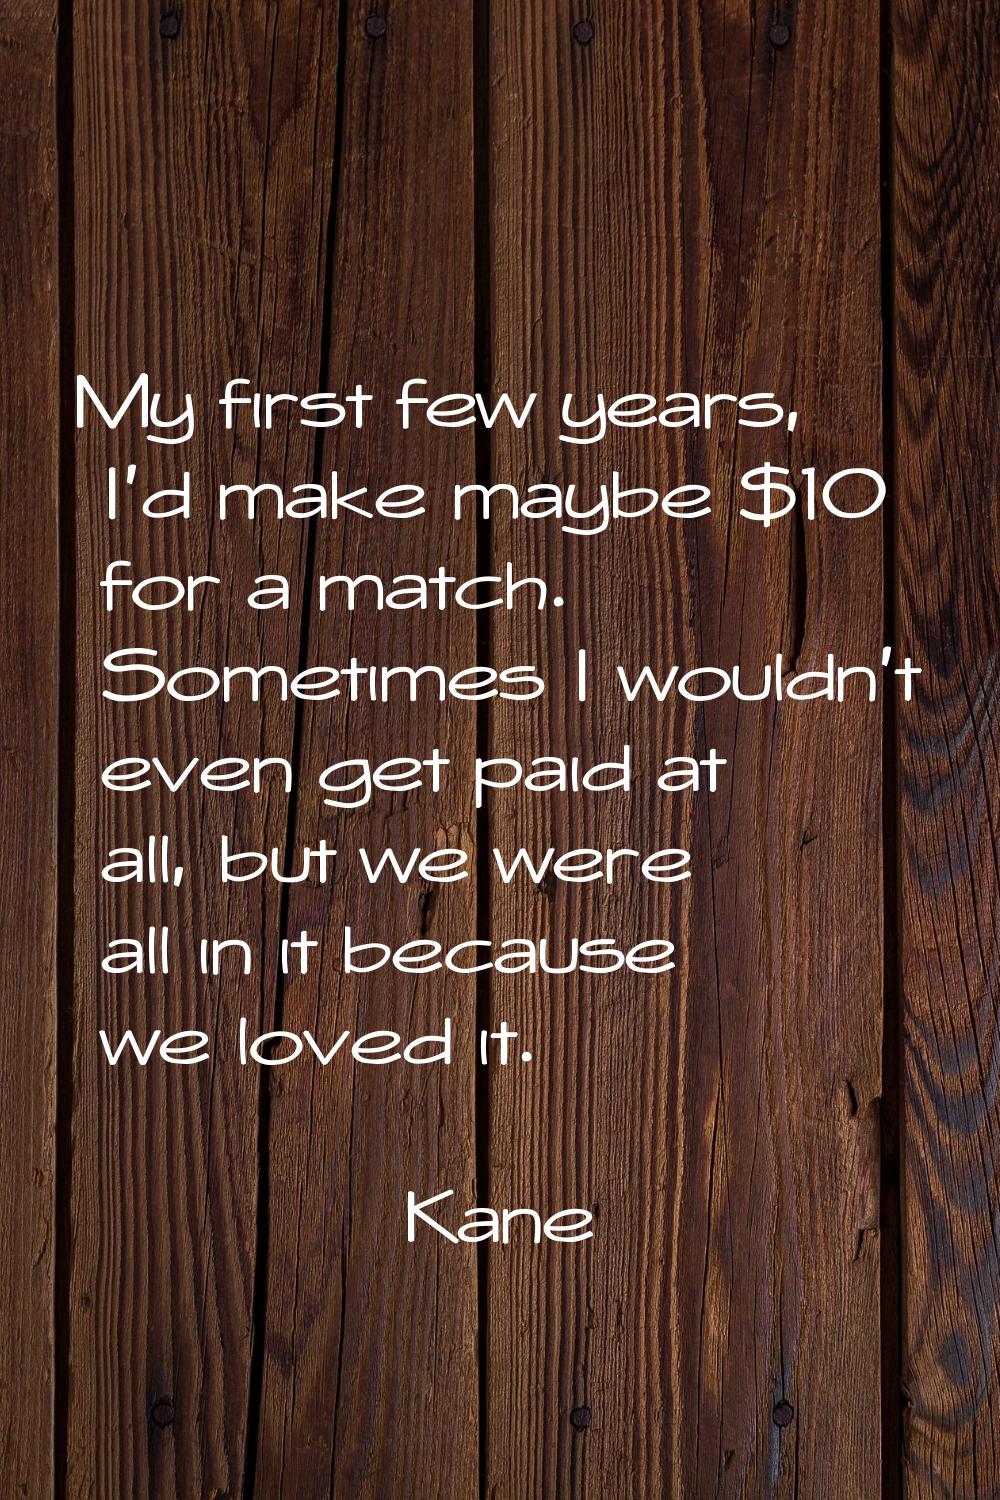 My first few years, I'd make maybe $10 for a match. Sometimes I wouldn't even get paid at all, but 